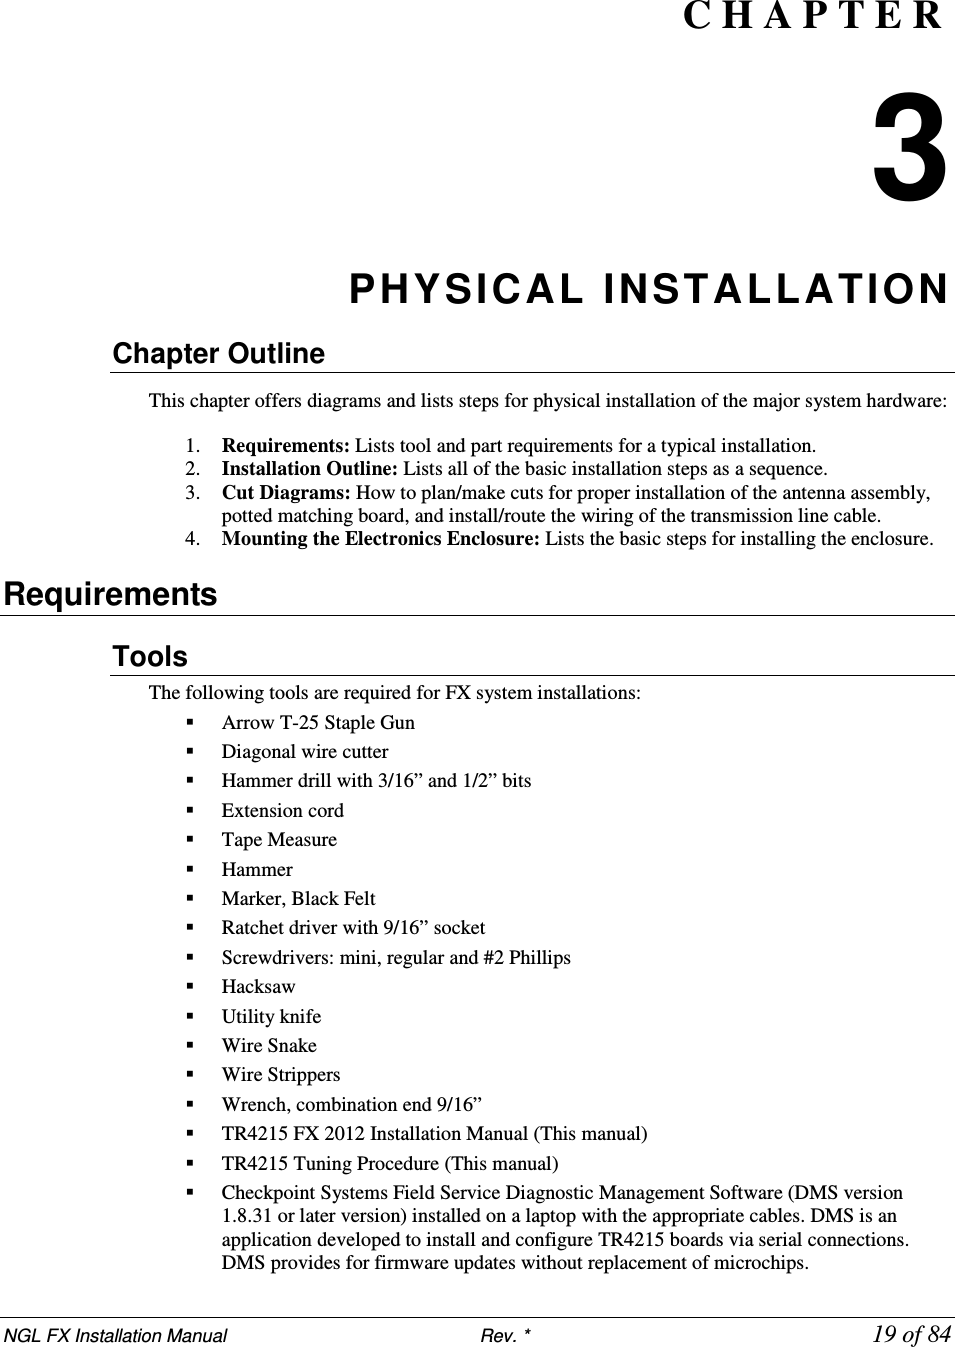 NGL FX Installation Manual                           Rev. *            19 of 84  C H A P T E R  3 PHYSICAL INSTALLATION Chapter Outline      This chapter offers diagrams and lists steps for physical installation of the major system hardware:    1. Requirements: Lists tool and part requirements for a typical installation. 2. Installation Outline: Lists all of the basic installation steps as a sequence. 3. Cut Diagrams: How to plan/make cuts for proper installation of the antenna assembly, potted matching board, and install/route the wiring of the transmission line cable. 4. Mounting the Electronics Enclosure: Lists the basic steps for installing the enclosure.  Requirements Tools  The following tools are required for FX system installations:   Arrow T-25 Staple Gun  Diagonal wire cutter   Hammer drill with 3/16” and 1/2” bits   Extension cord   Tape Measure  Hammer   Marker, Black Felt   Ratchet driver with 9/16” socket  Screwdrivers: mini, regular and #2 Phillips      Hacksaw  Utility knife   Wire Snake  Wire Strippers   Wrench, combination end 9/16”  TR4215 FX 2012 Installation Manual (This manual)  TR4215 Tuning Procedure (This manual)  Checkpoint Systems Field Service Diagnostic Management Software (DMS version 1.8.31 or later version) installed on a laptop with the appropriate cables. DMS is an application developed to install and configure TR4215 boards via serial connections. DMS provides for firmware updates without replacement of microchips. 